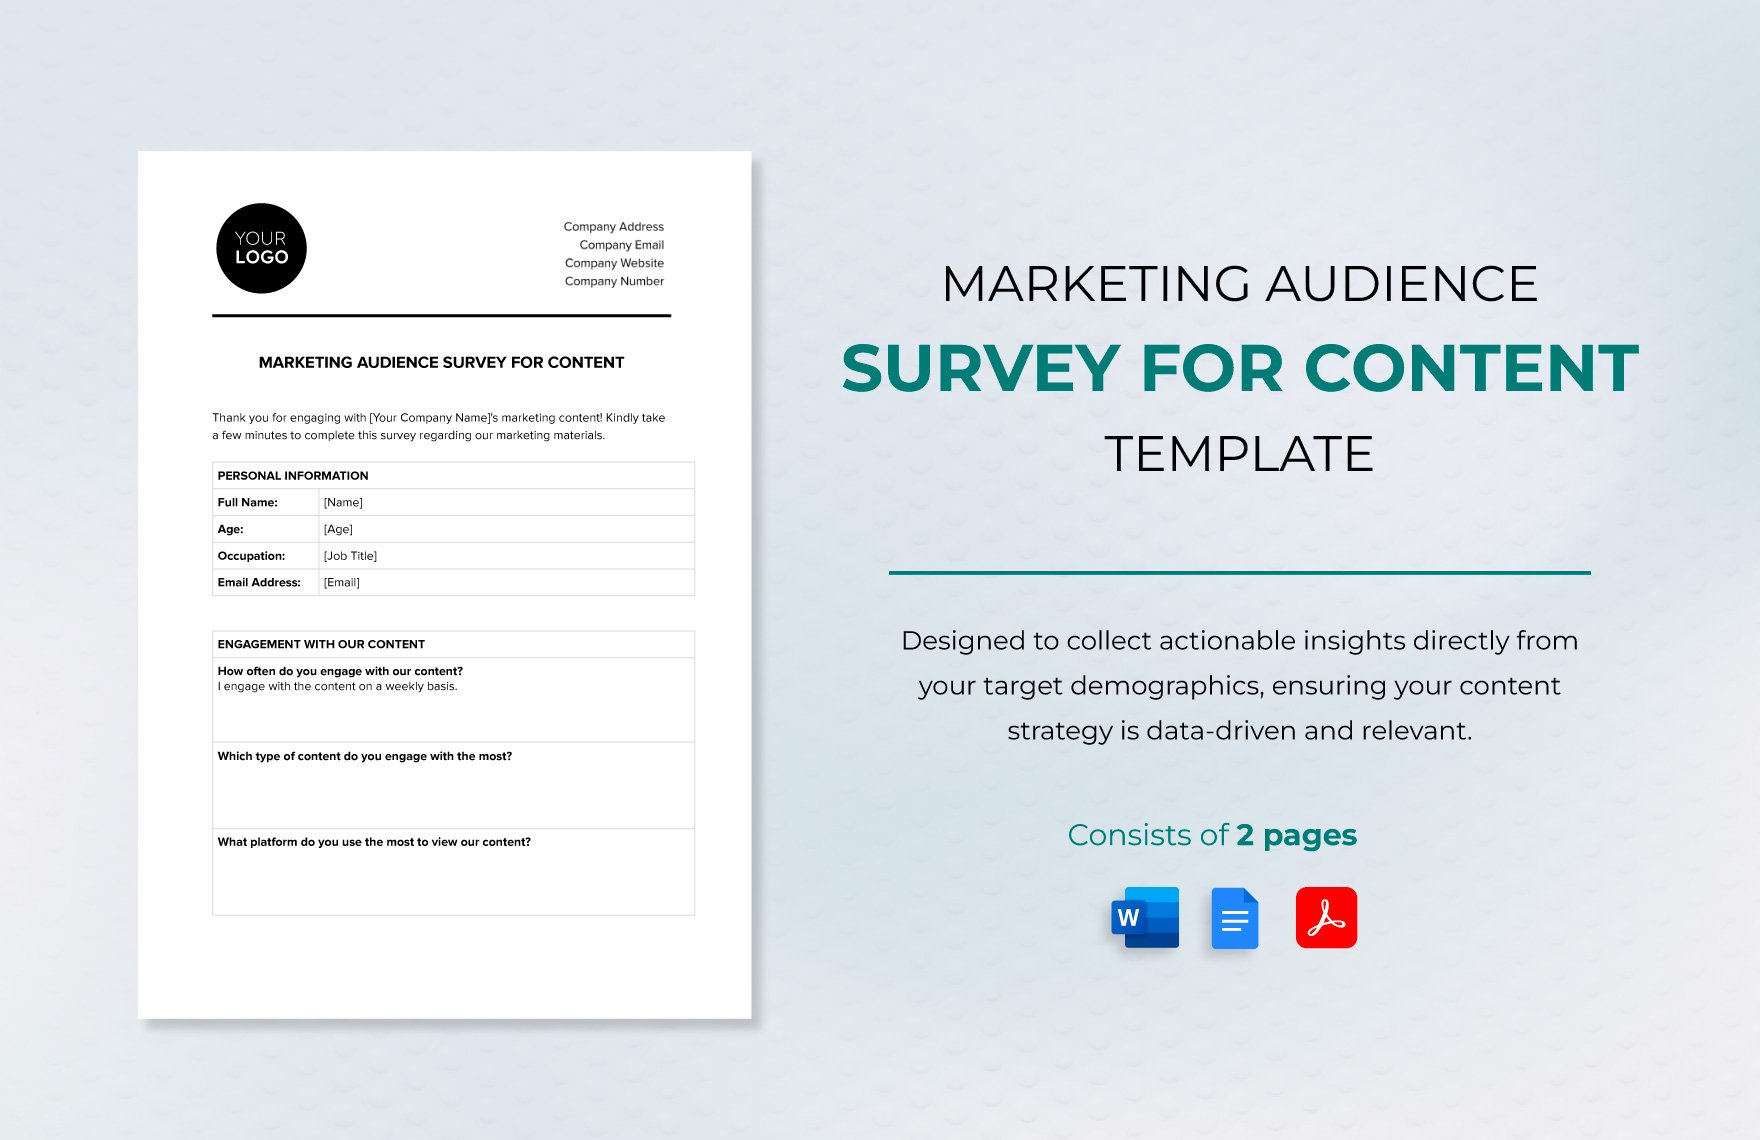 Marketing Audience Survey for Content Template